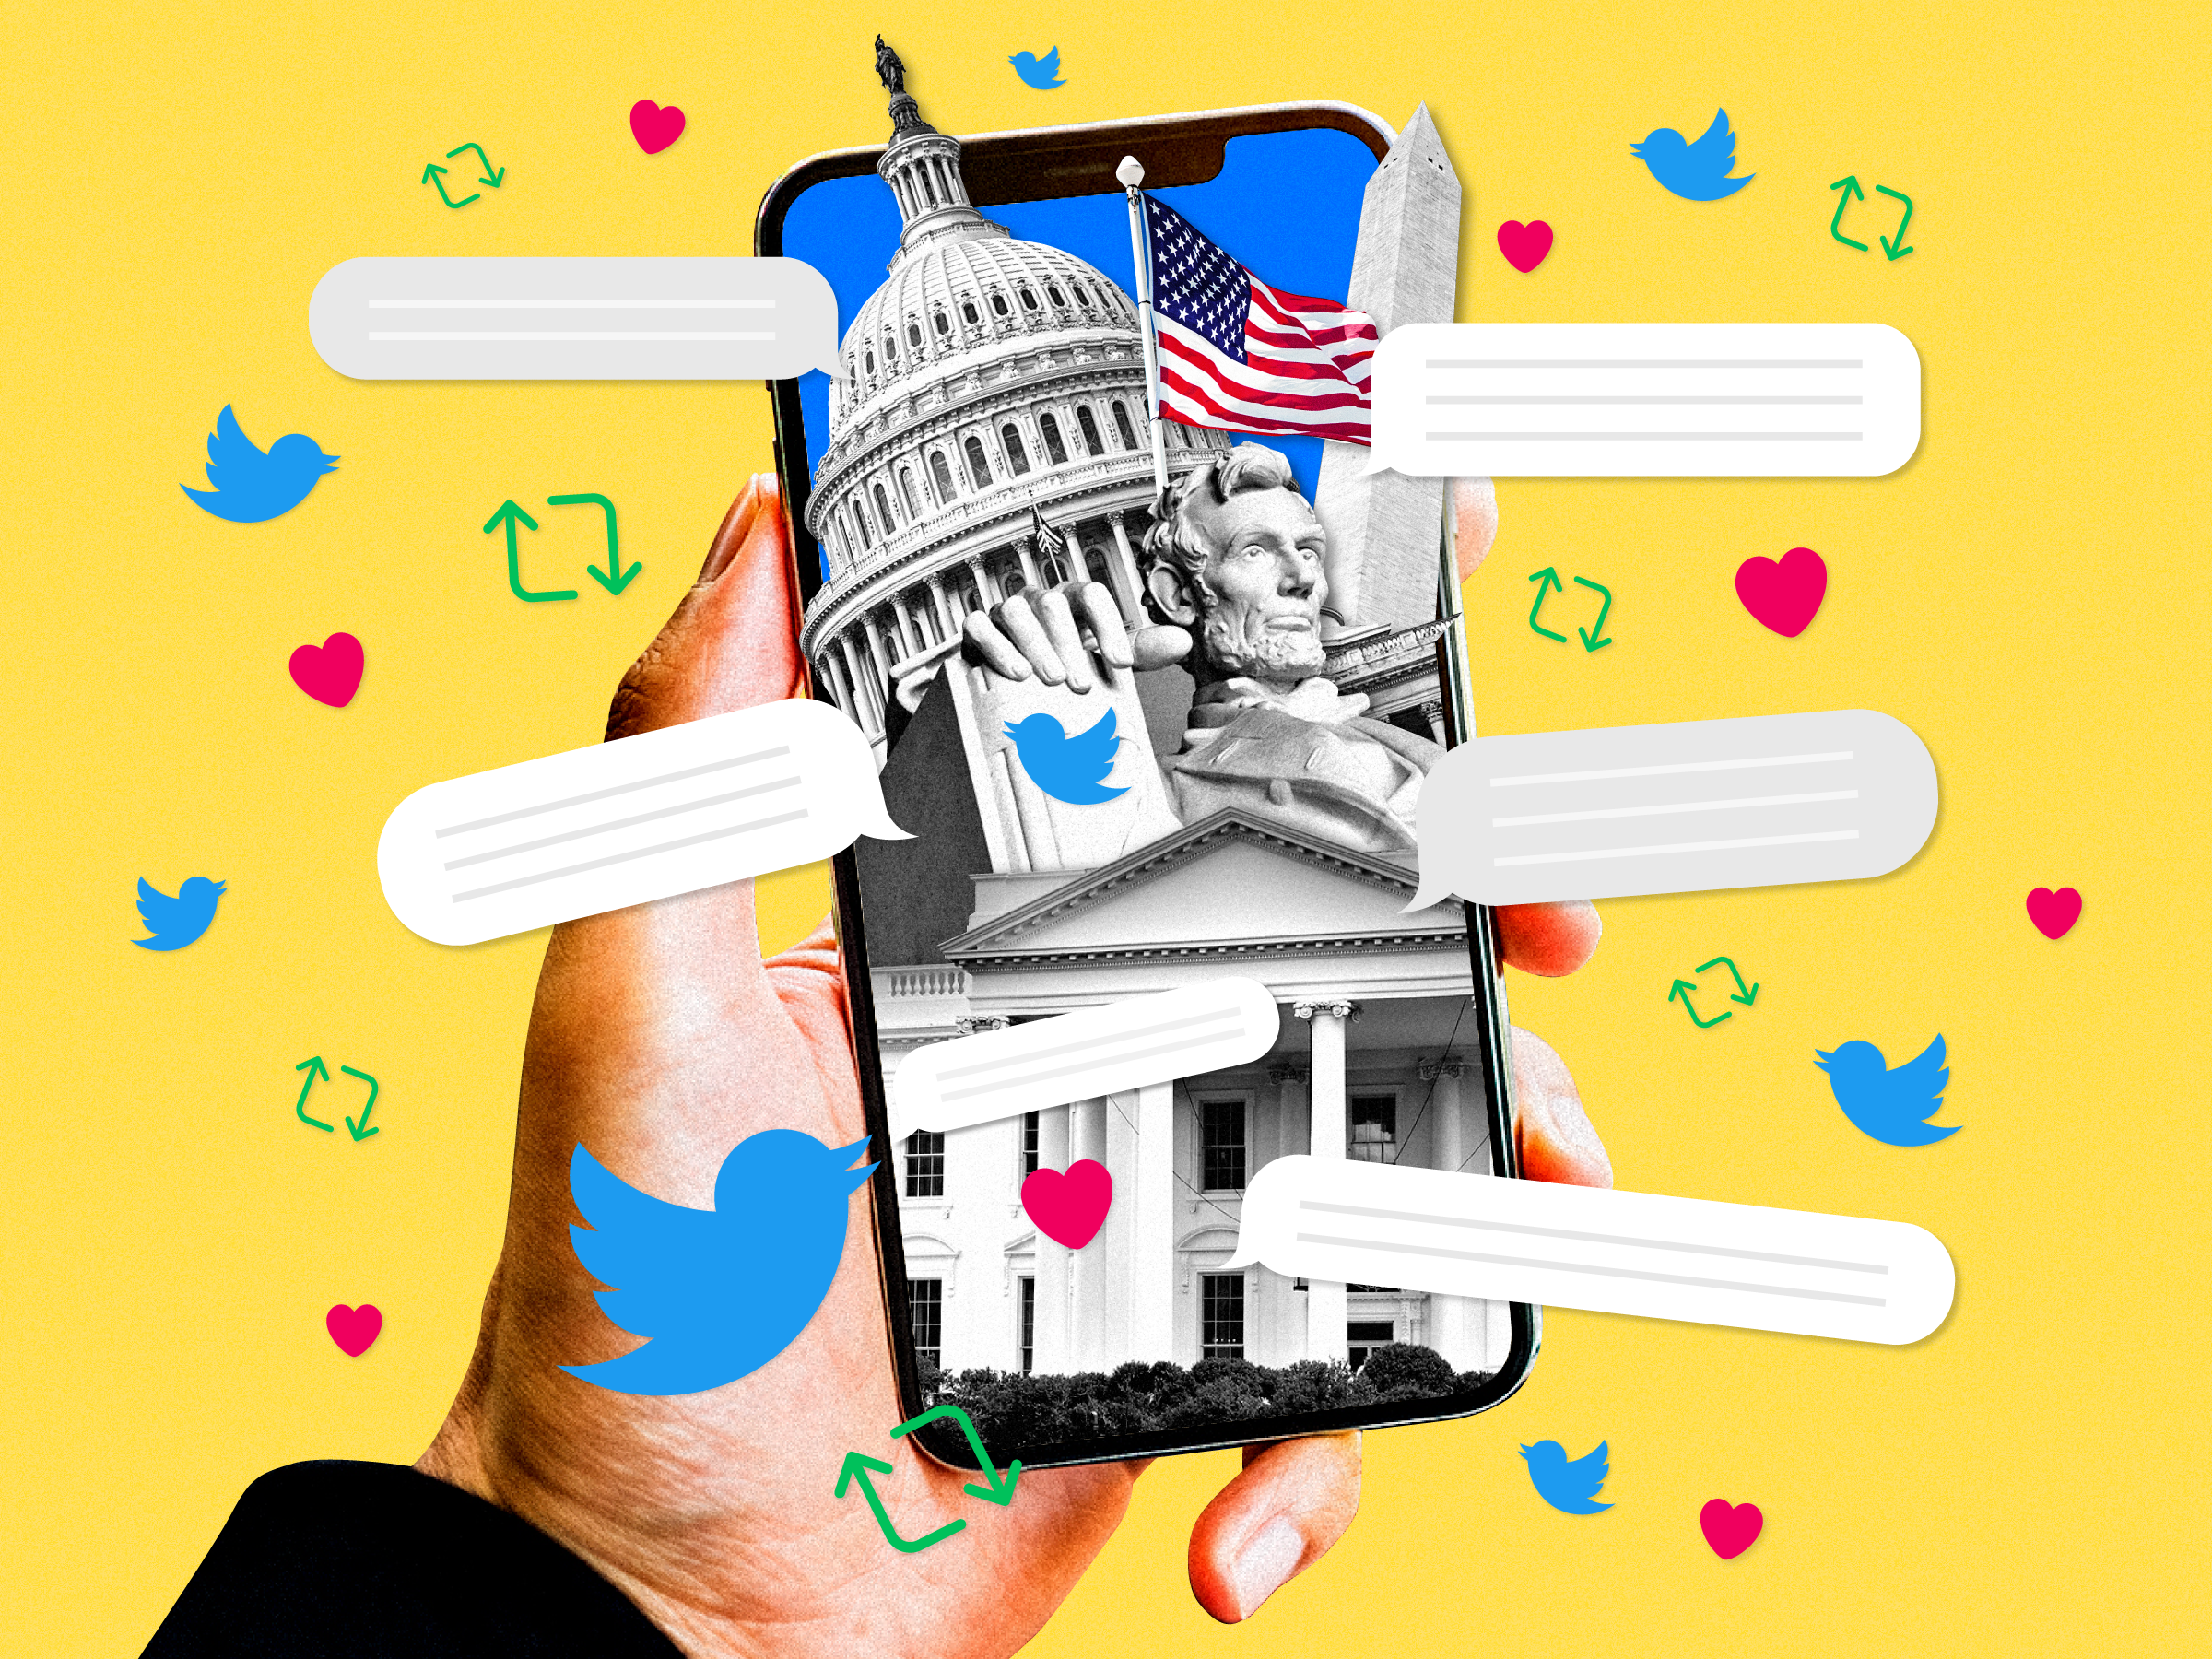 A hand holding a phone with the Capitol building, American flag, Lincoln Memorial, and White House on the screen. Twitter birds, retweet, and like icons surround the phone on a yellow background.